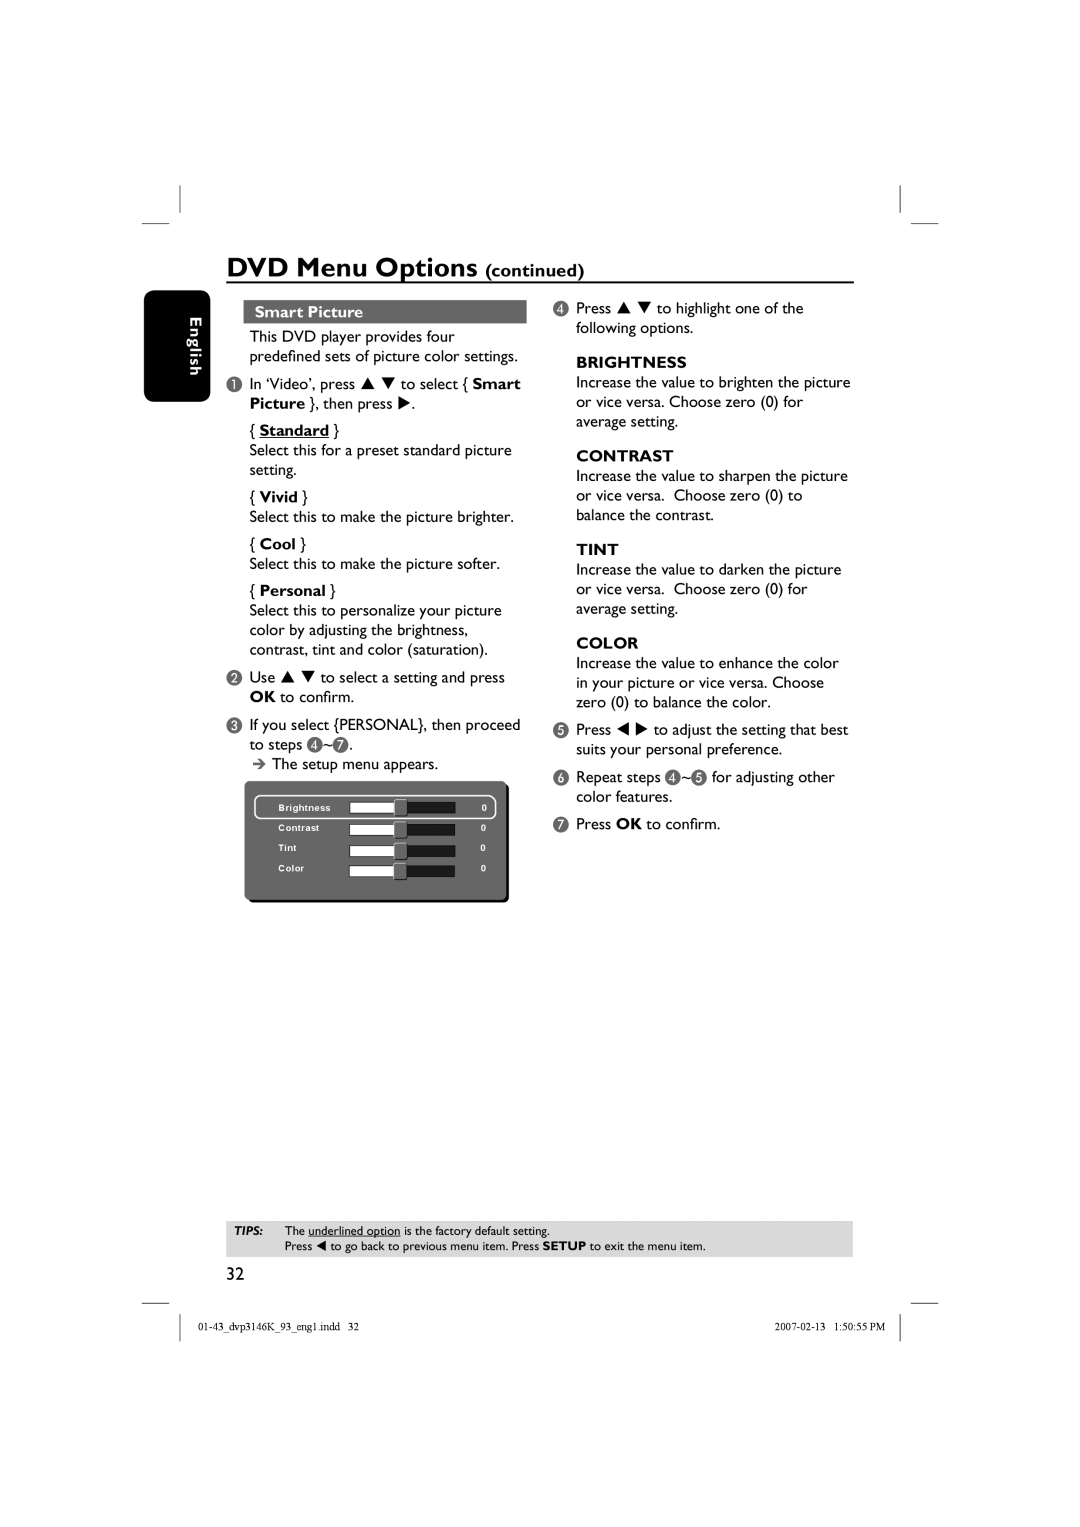 Philips DVP3146K/93 user manual Smart Picture, Standard, Vivid, Cool, Personal, Brightness, Contrast, Tint, Color, English 